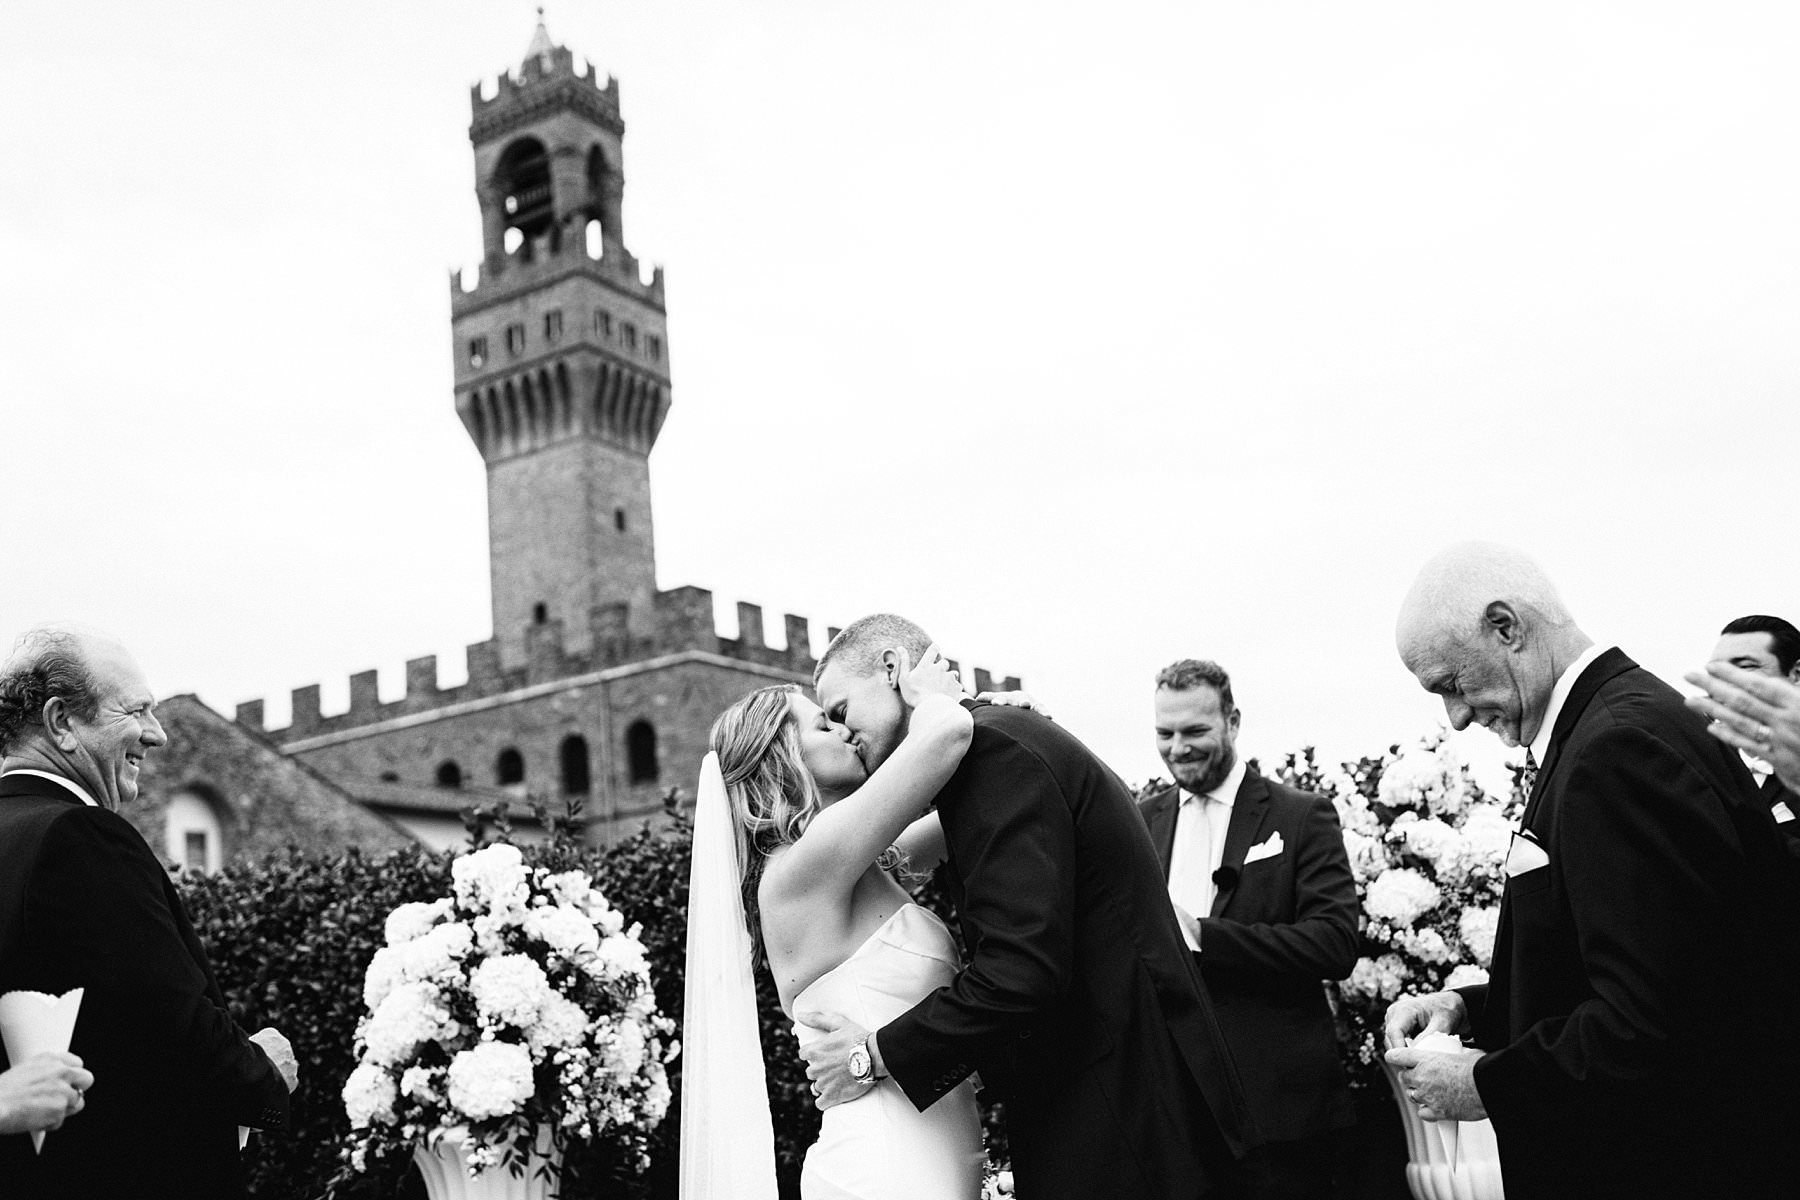 Beth and Evan’s exquisite wedding: just like a dream. When you bring together a lovely couple, a small group of family members and friends and the best venues in a charming city like Florence, you can only get one result: an exquisite wedding to be cherished forever. Bride and groom first kiss in the breathtaking top terrace in Palazzo Gondi in the very heart of Florence